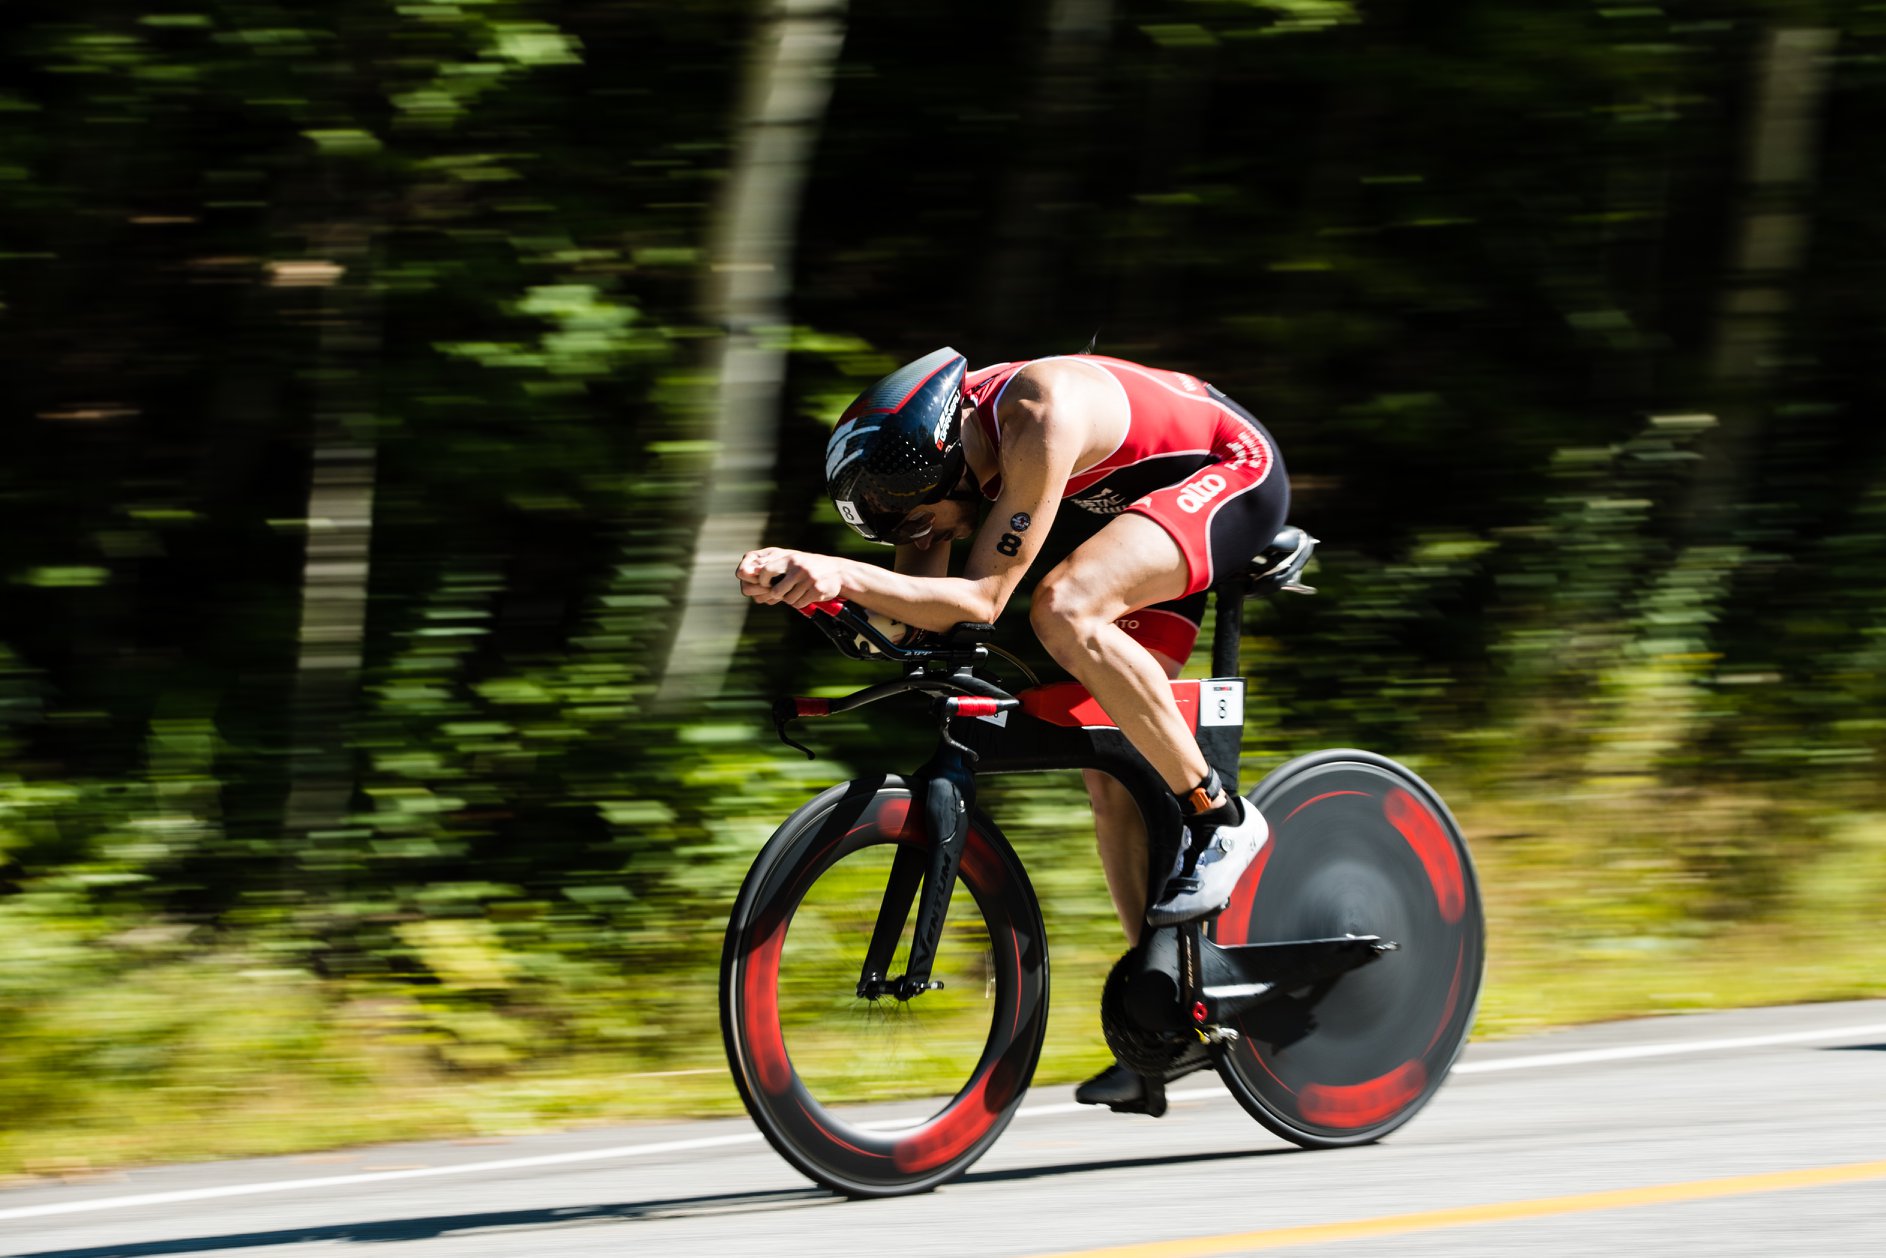 Coach_Terry_Wilson_Pursuit_of_The_Perfect_Race_IRONMAN_Mont_Tremblant_Cody_Beals_Bike.jpg